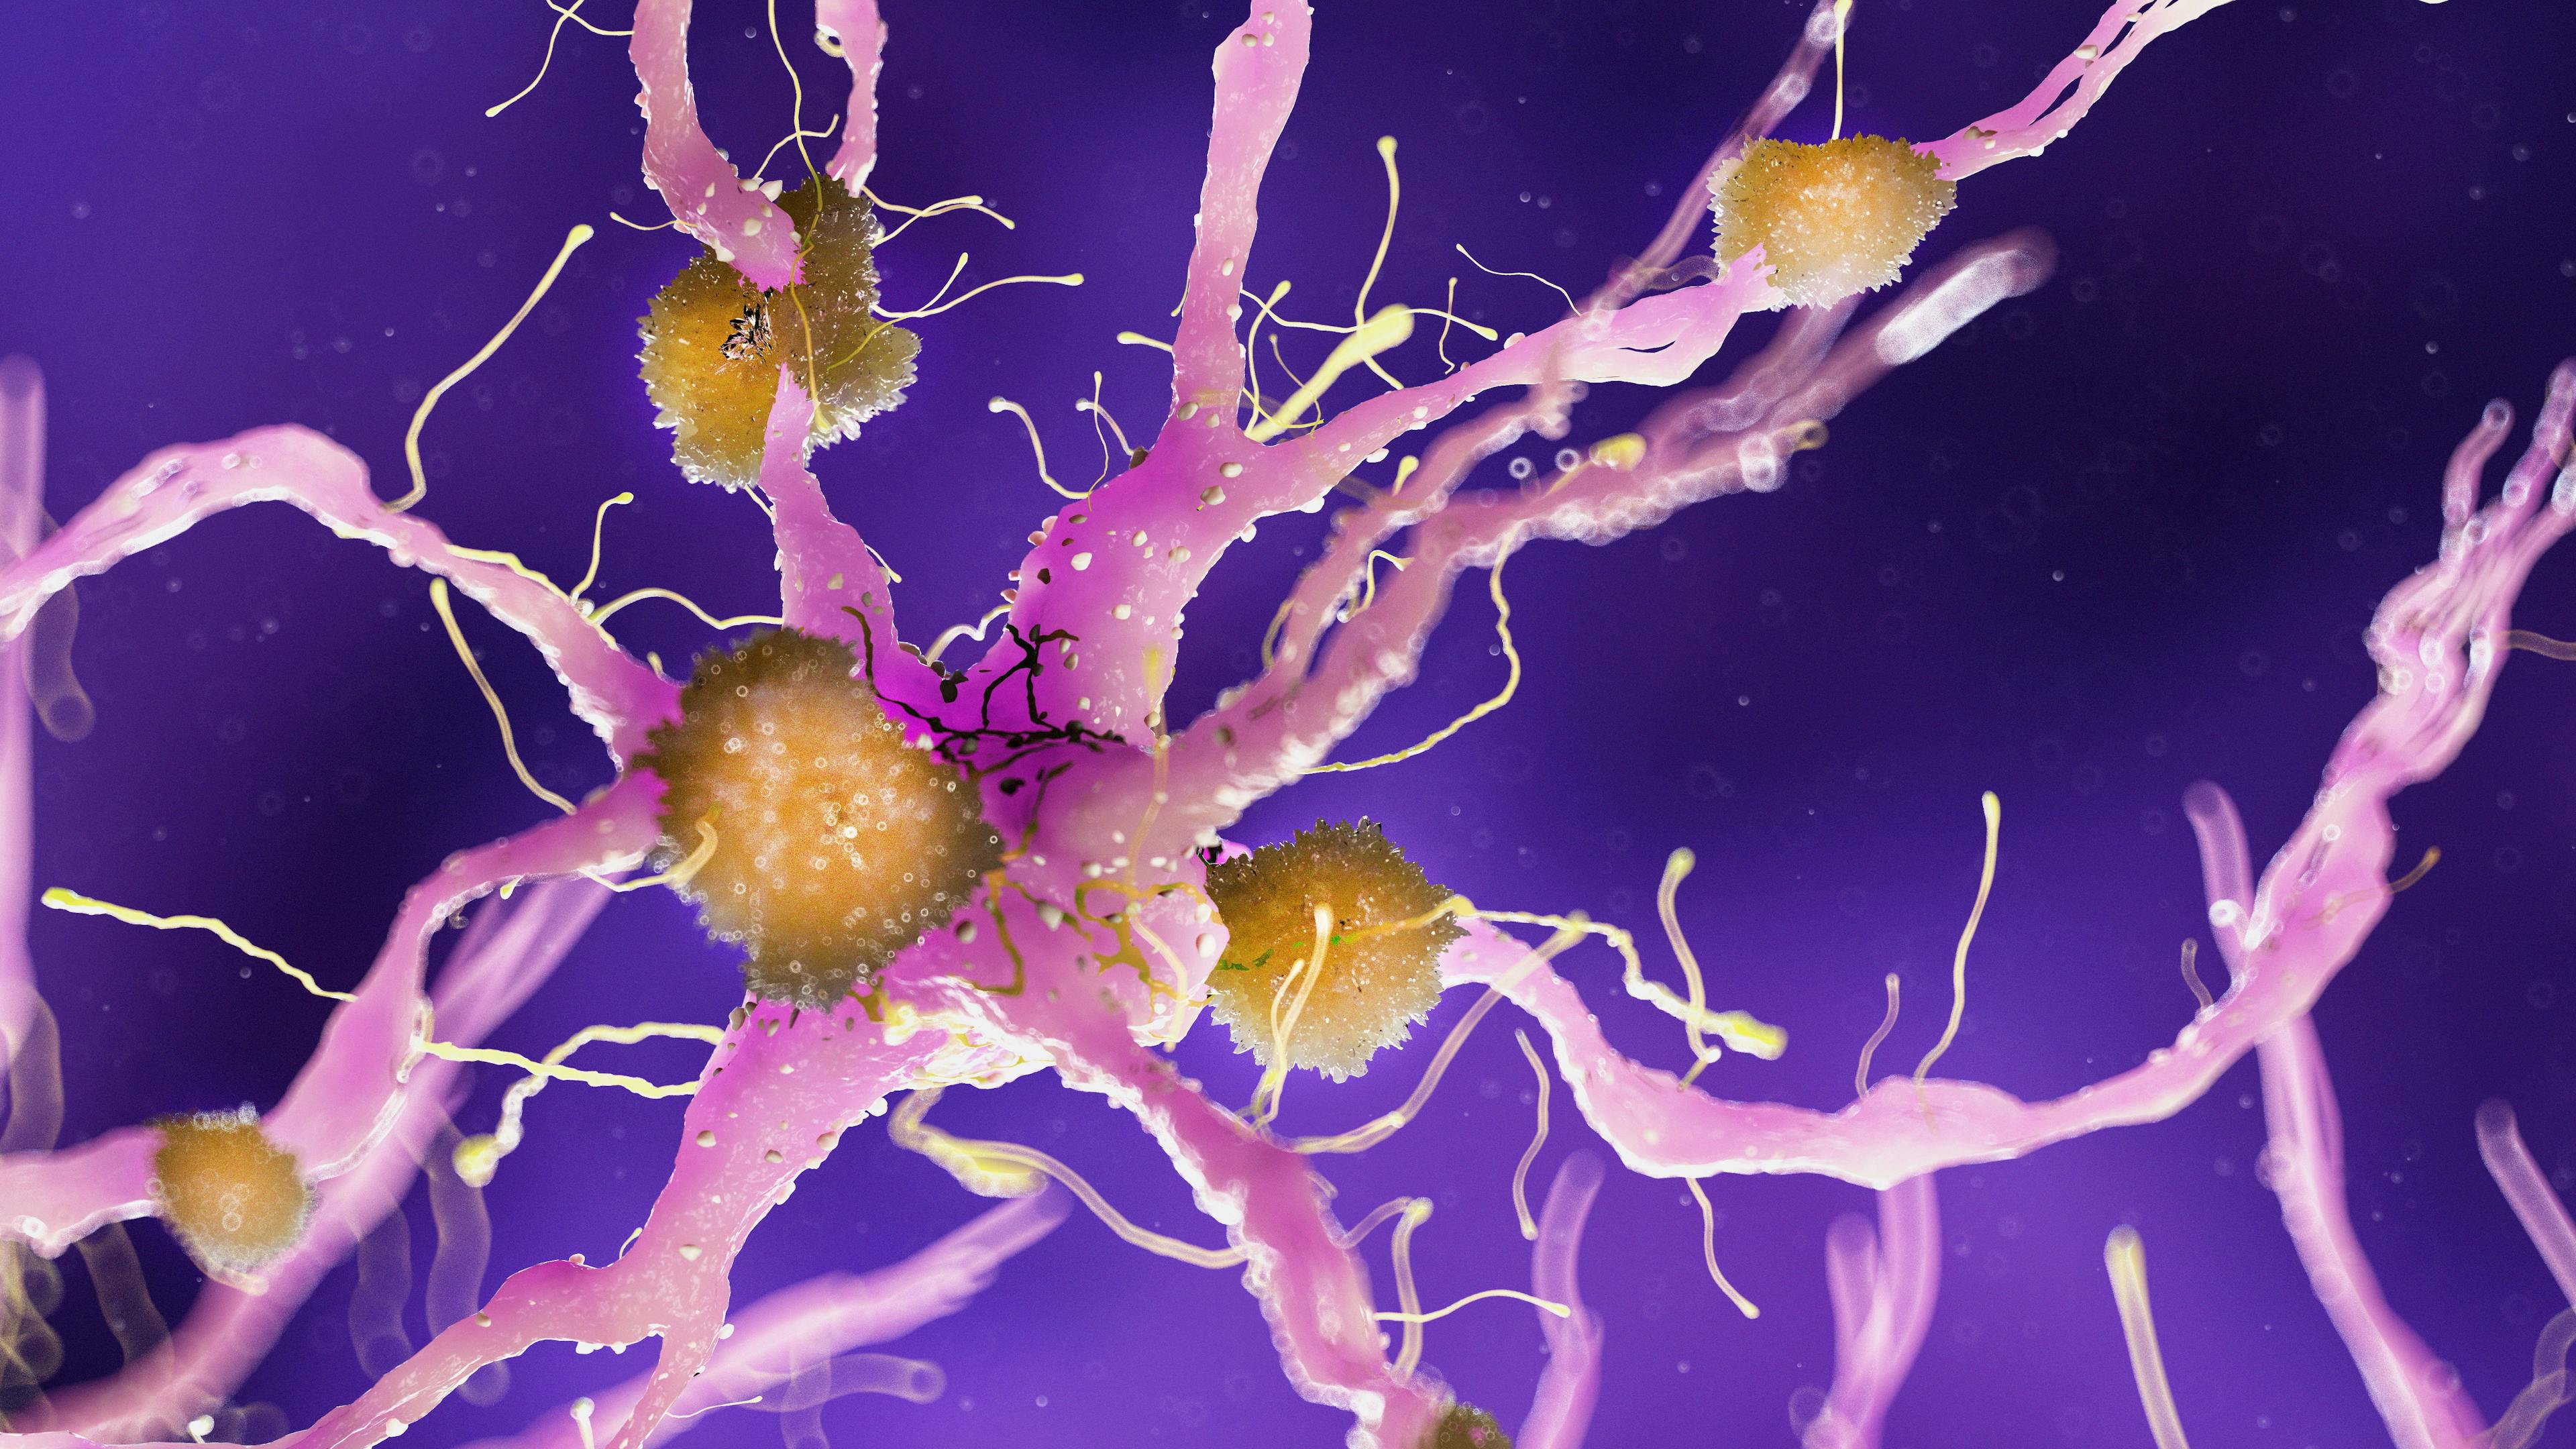 Autologous Adipose Stem Cells Safe in Alzheimer Disease, More Efficacy Data Needed